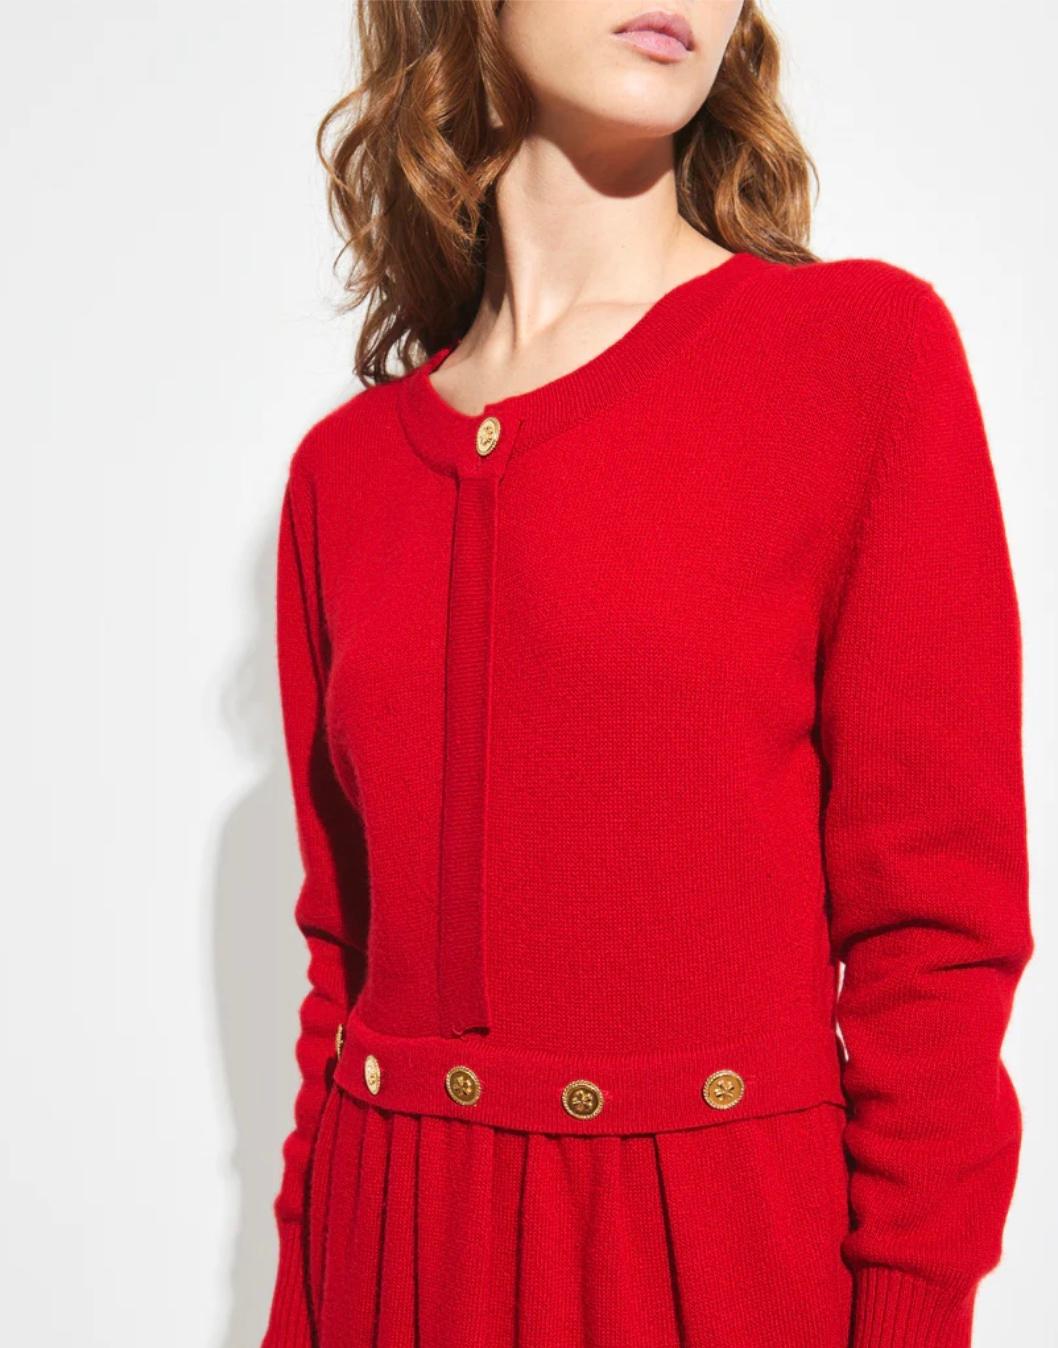 Chanel 1980s Sweater Dress In Excellent Condition For Sale In New York, NY